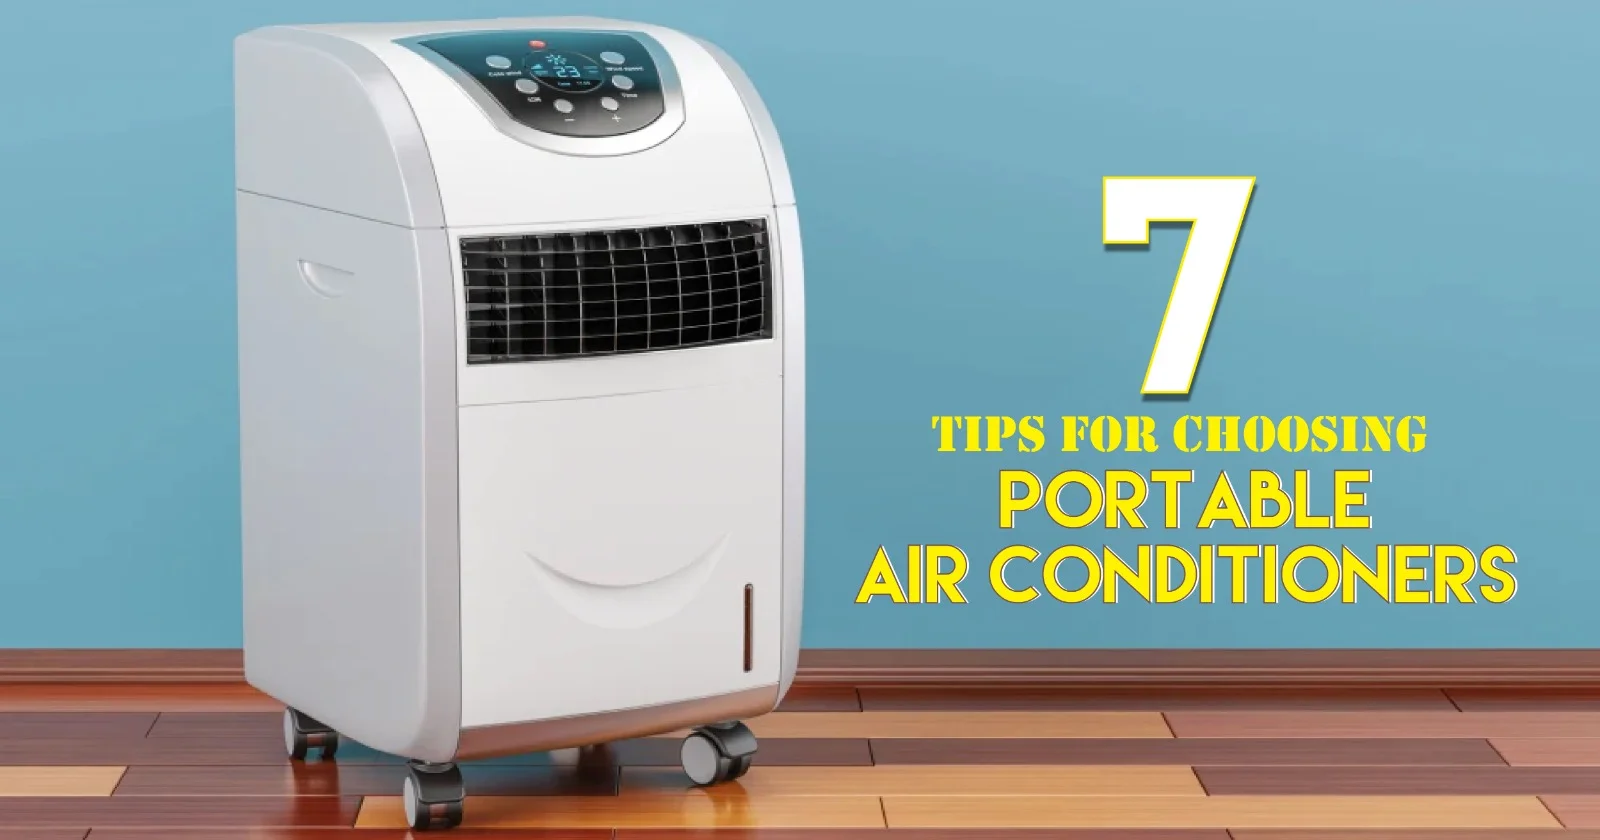 7 Tips for Choosing Portable Air Conditioners for your Home